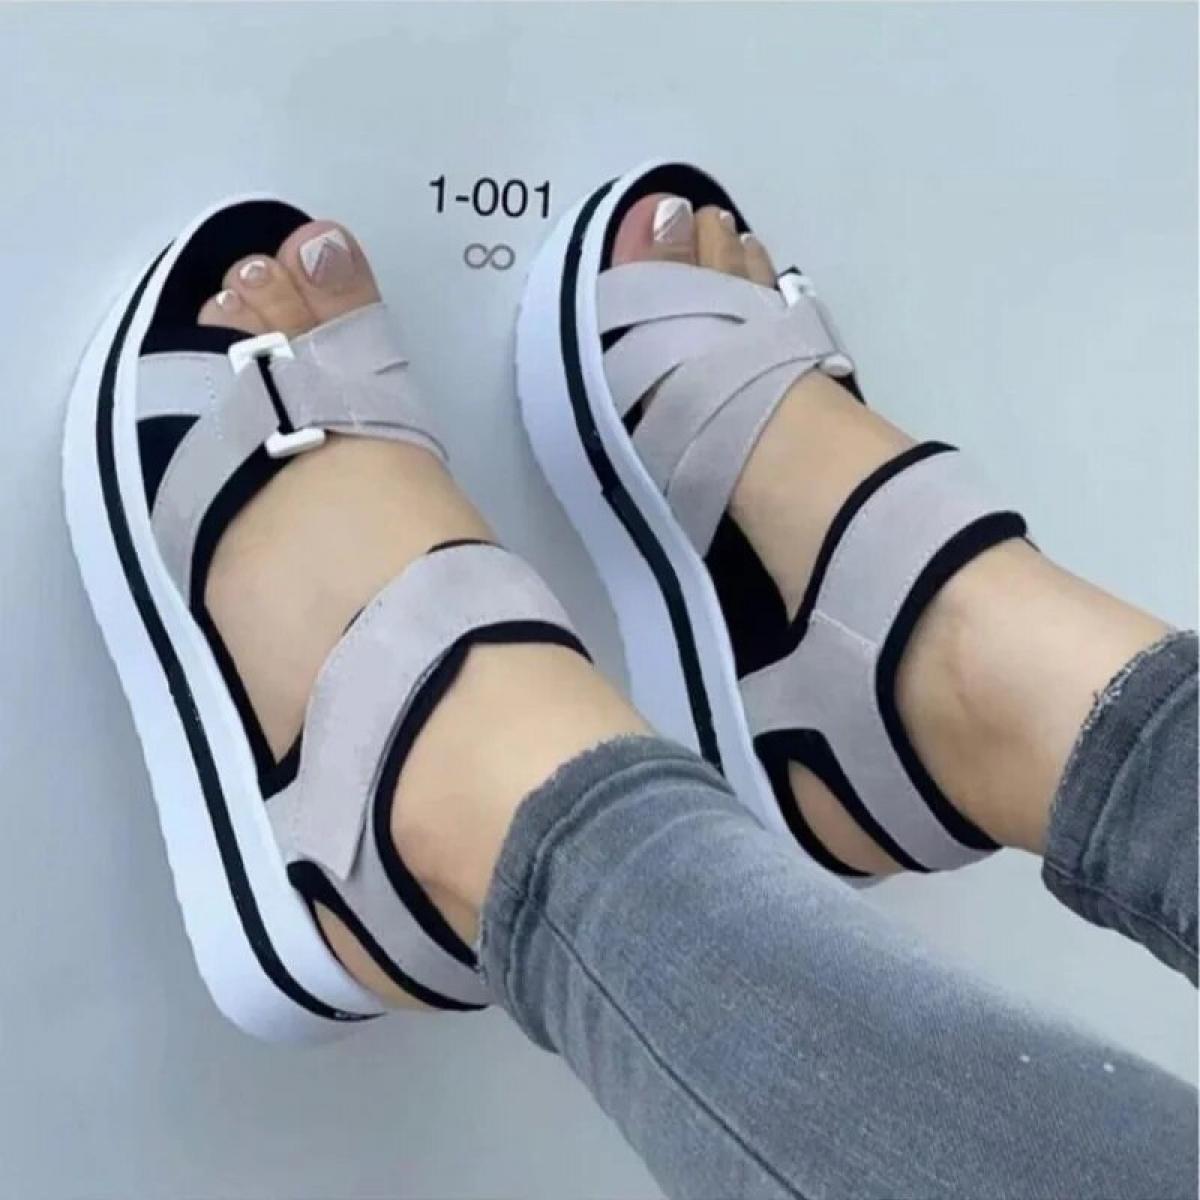 2023 Spring New Spring Summer Women's Sandals Low Heel Open Toe Open Toe Women's Shoes Fashion Slotted Buckle Solid Colo